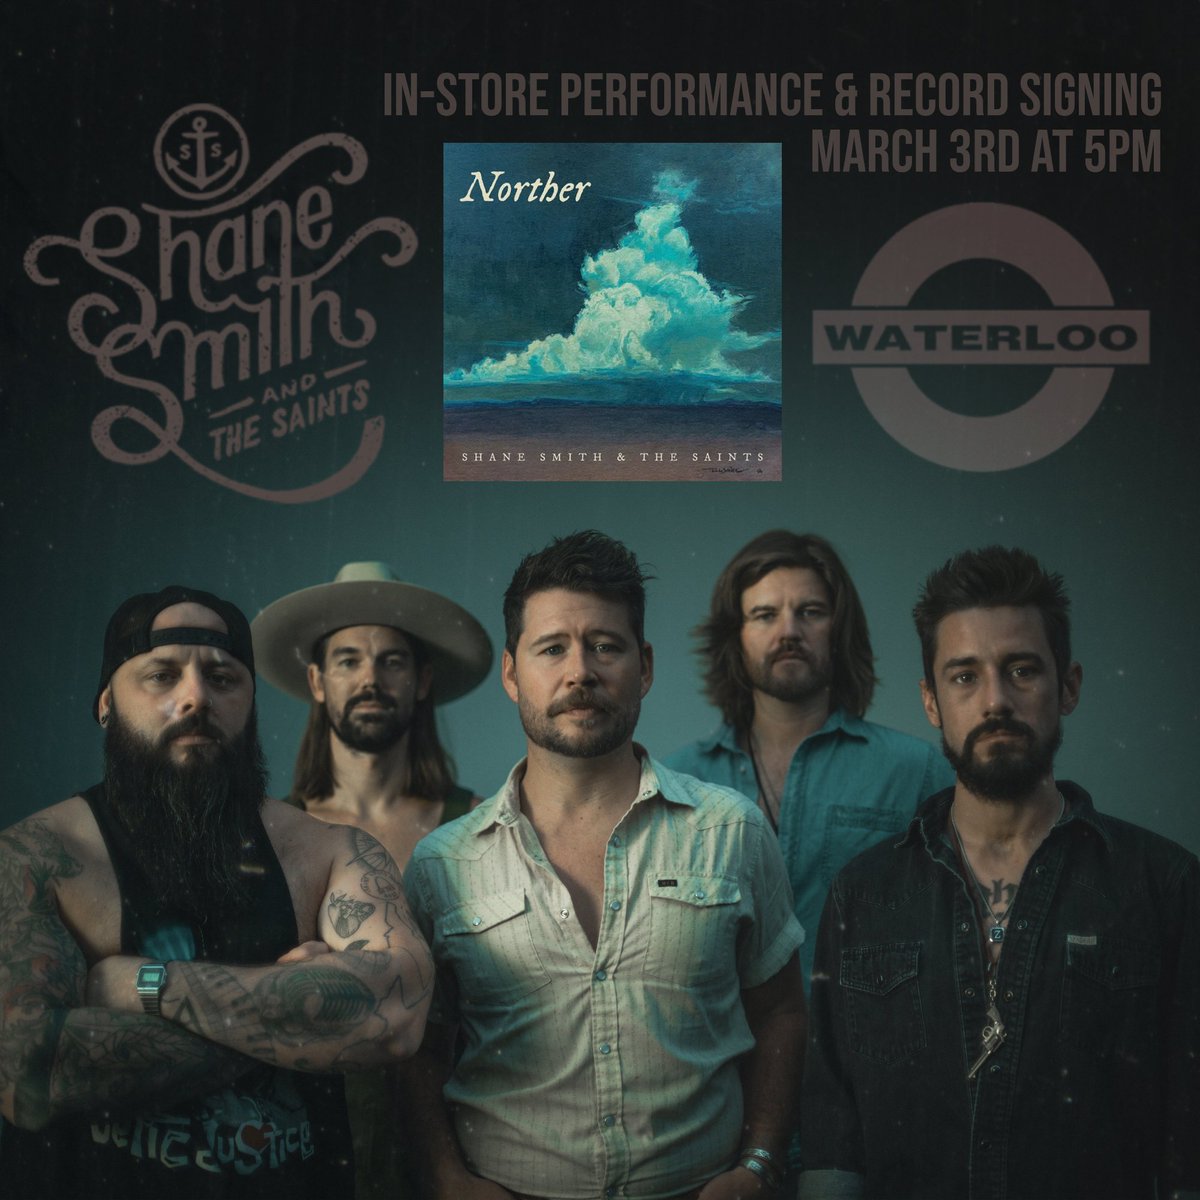 We've got a good one today! Shane Smith & the Saints are riding high on the release of their first studio album in five years, NORTHER! The record came out on Friday, and we have copies of it on CD and vinyl. Catch the band today at 5pm for a performance and record signing!